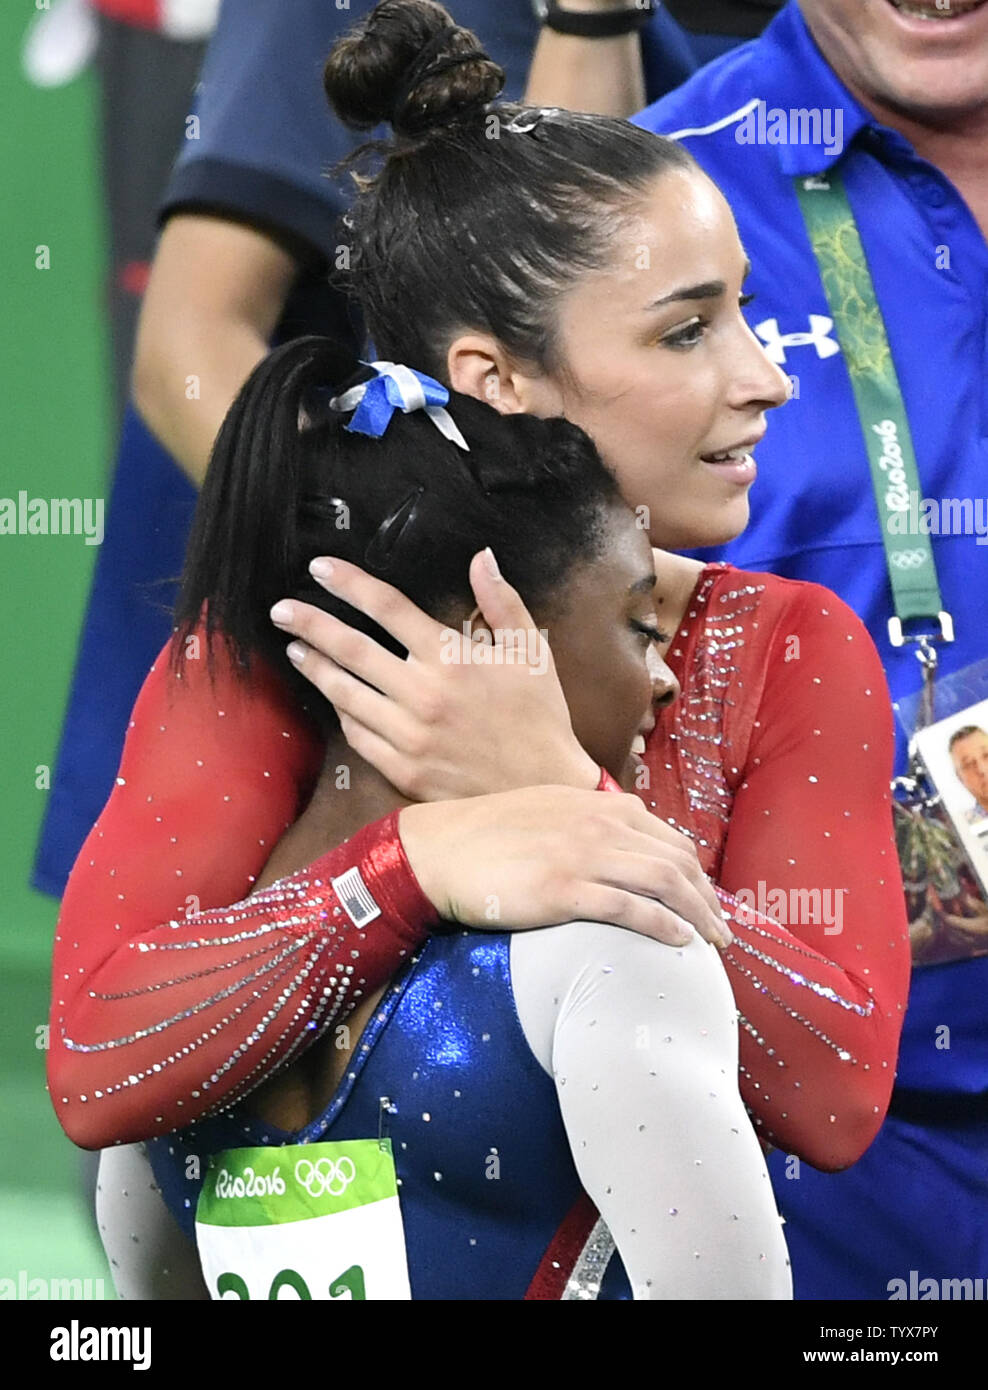 Aly Raisman And Simone Biles Embrace On The Olympic Floor In The Floor Exercise In The Women S Artistic Gymnastics Individual All Around Finals Of The 16 Rio Summer Olympics In Rio De Janeiro